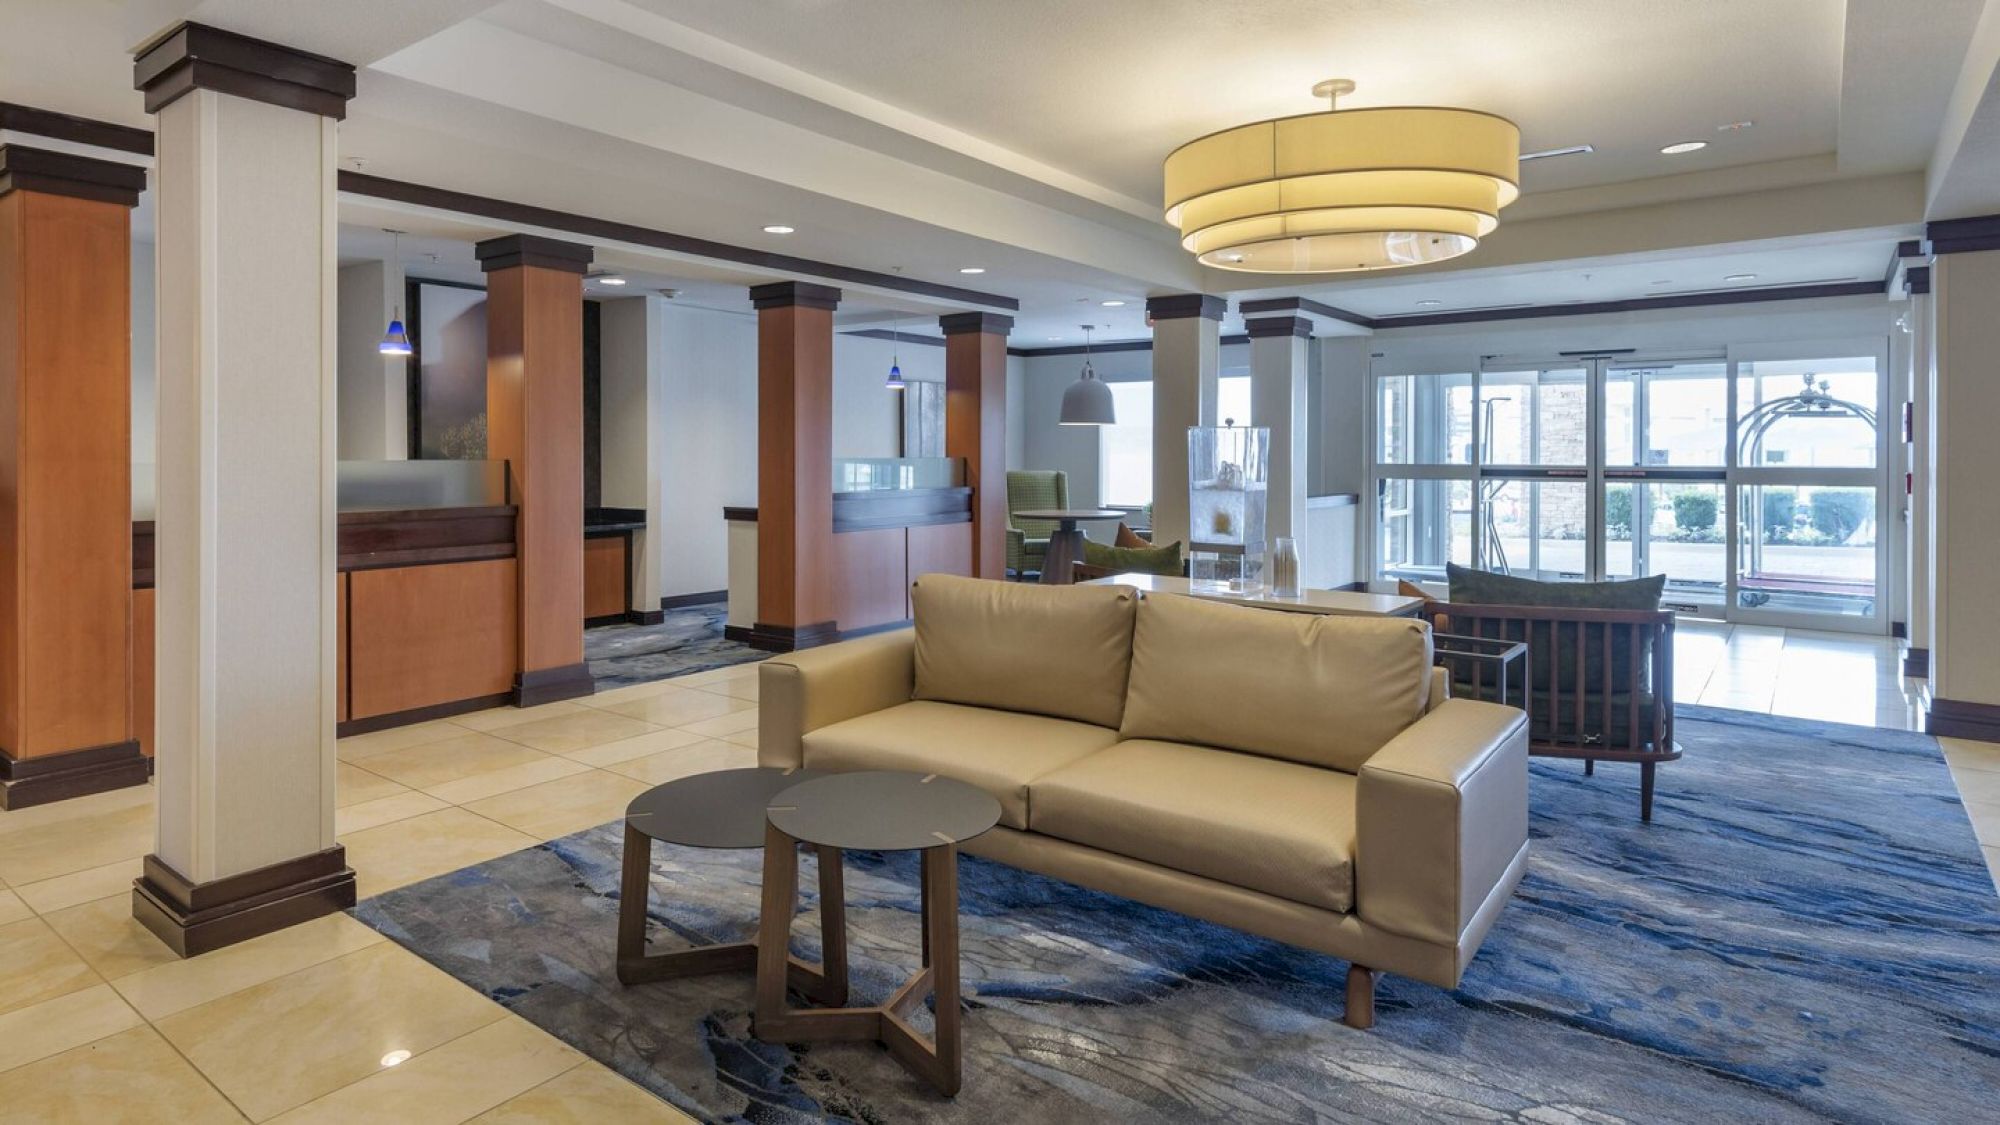 A modern hotel lobby with a beige sofa, small tables, reception area, glass entrance doors, and contemporary decor.